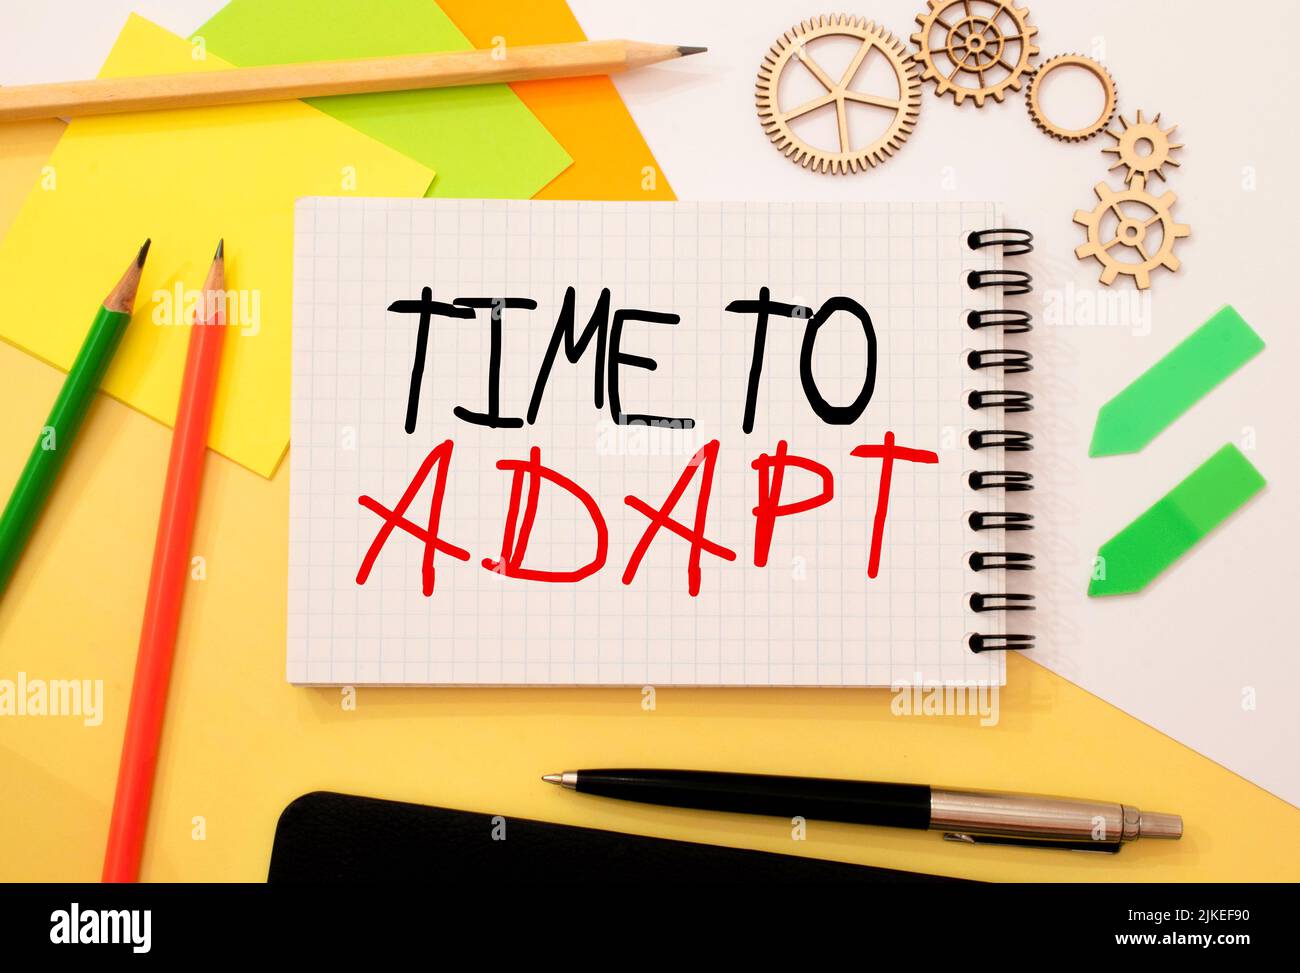 Writing text showing TIME TO ADAPT. Word text Know your rights on white paper card, red and black letters. Business concept for Education. Stock Photo